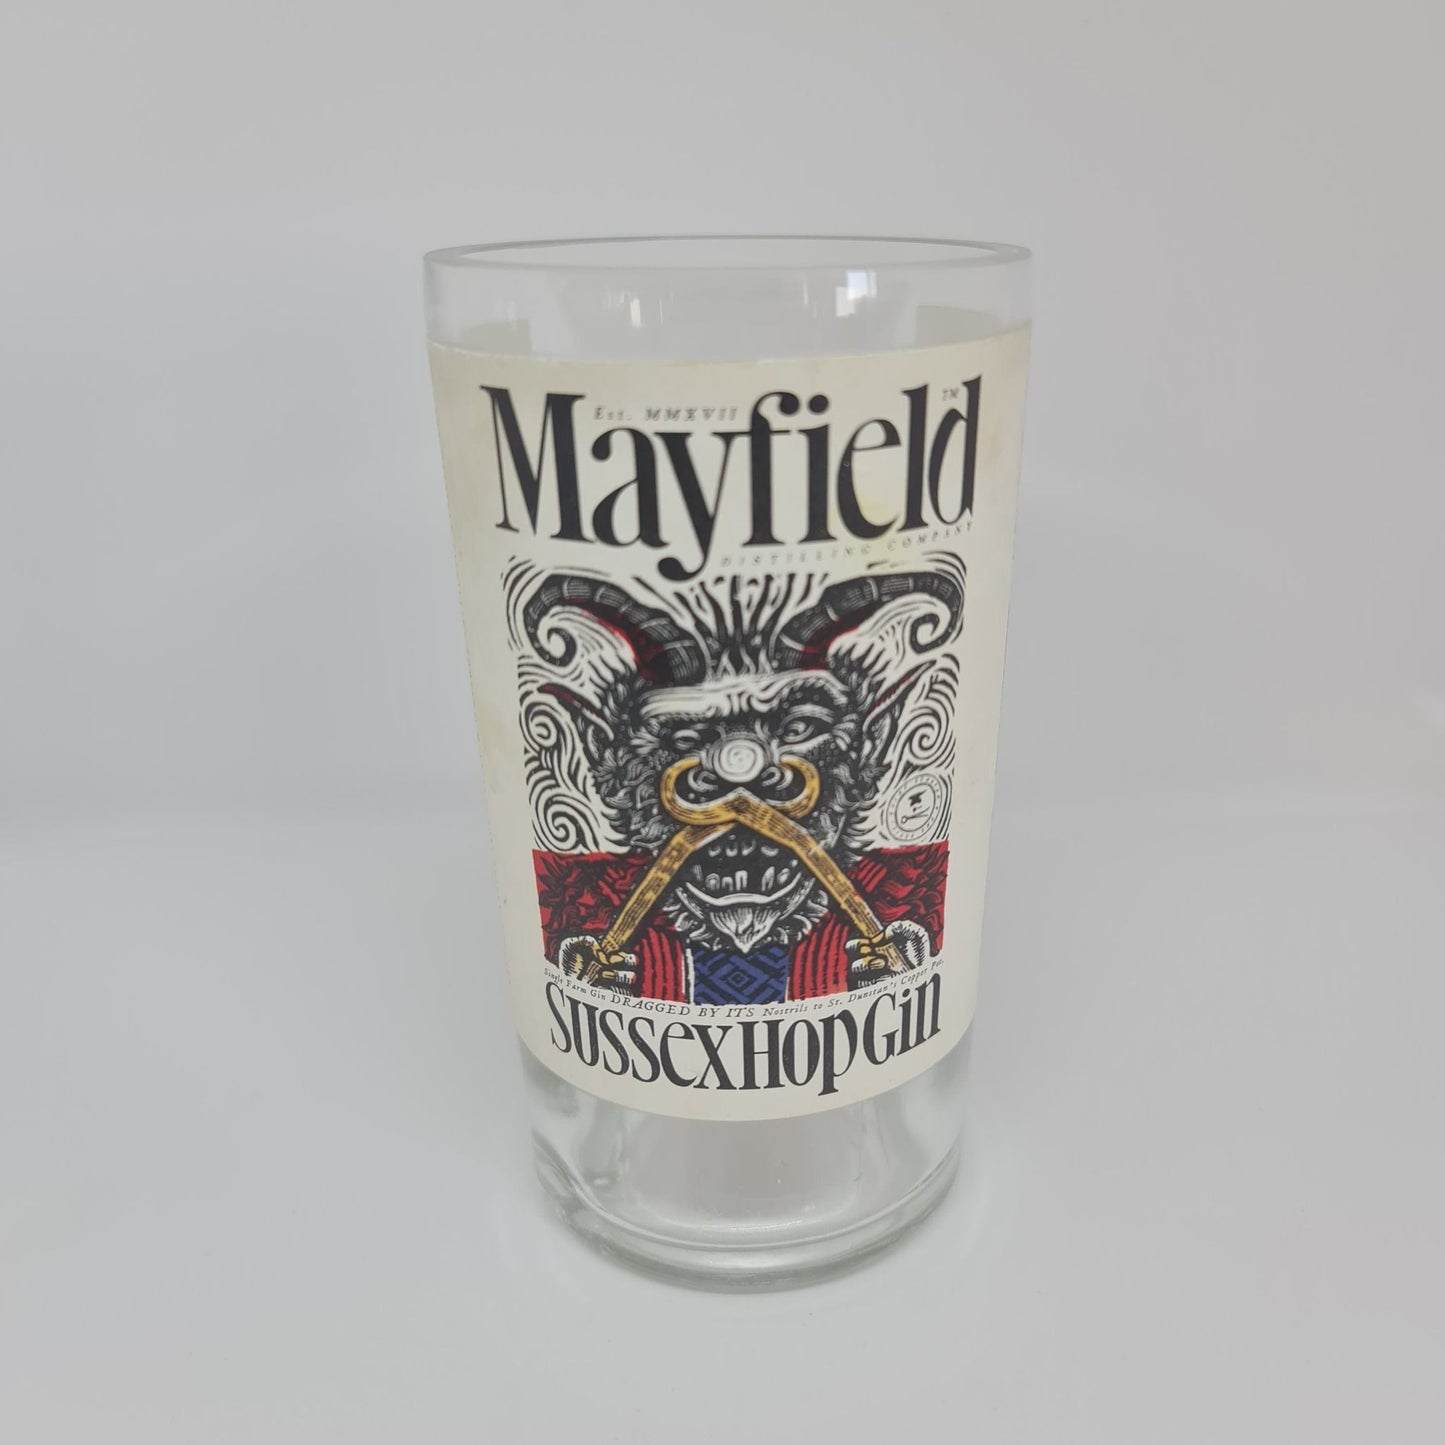 Mayfield Sussex Hop Gin Bottle Candle